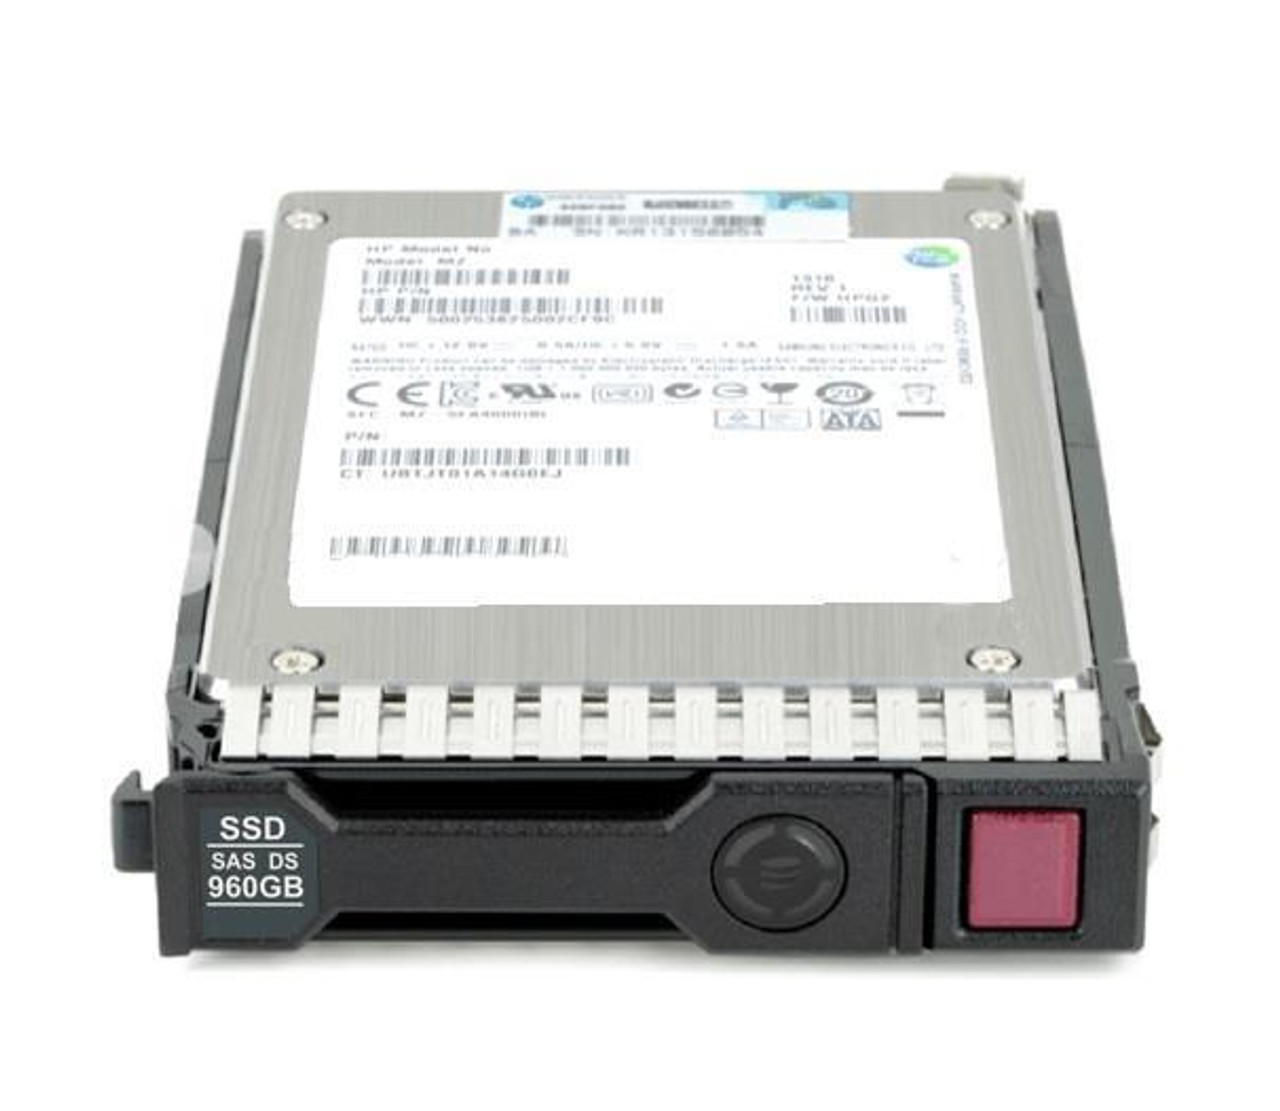 P13010-001 HPE MSA 960GB SAS 12Gbps Read Intensive 2.5-inch Internal Solid State Drive (SSD)